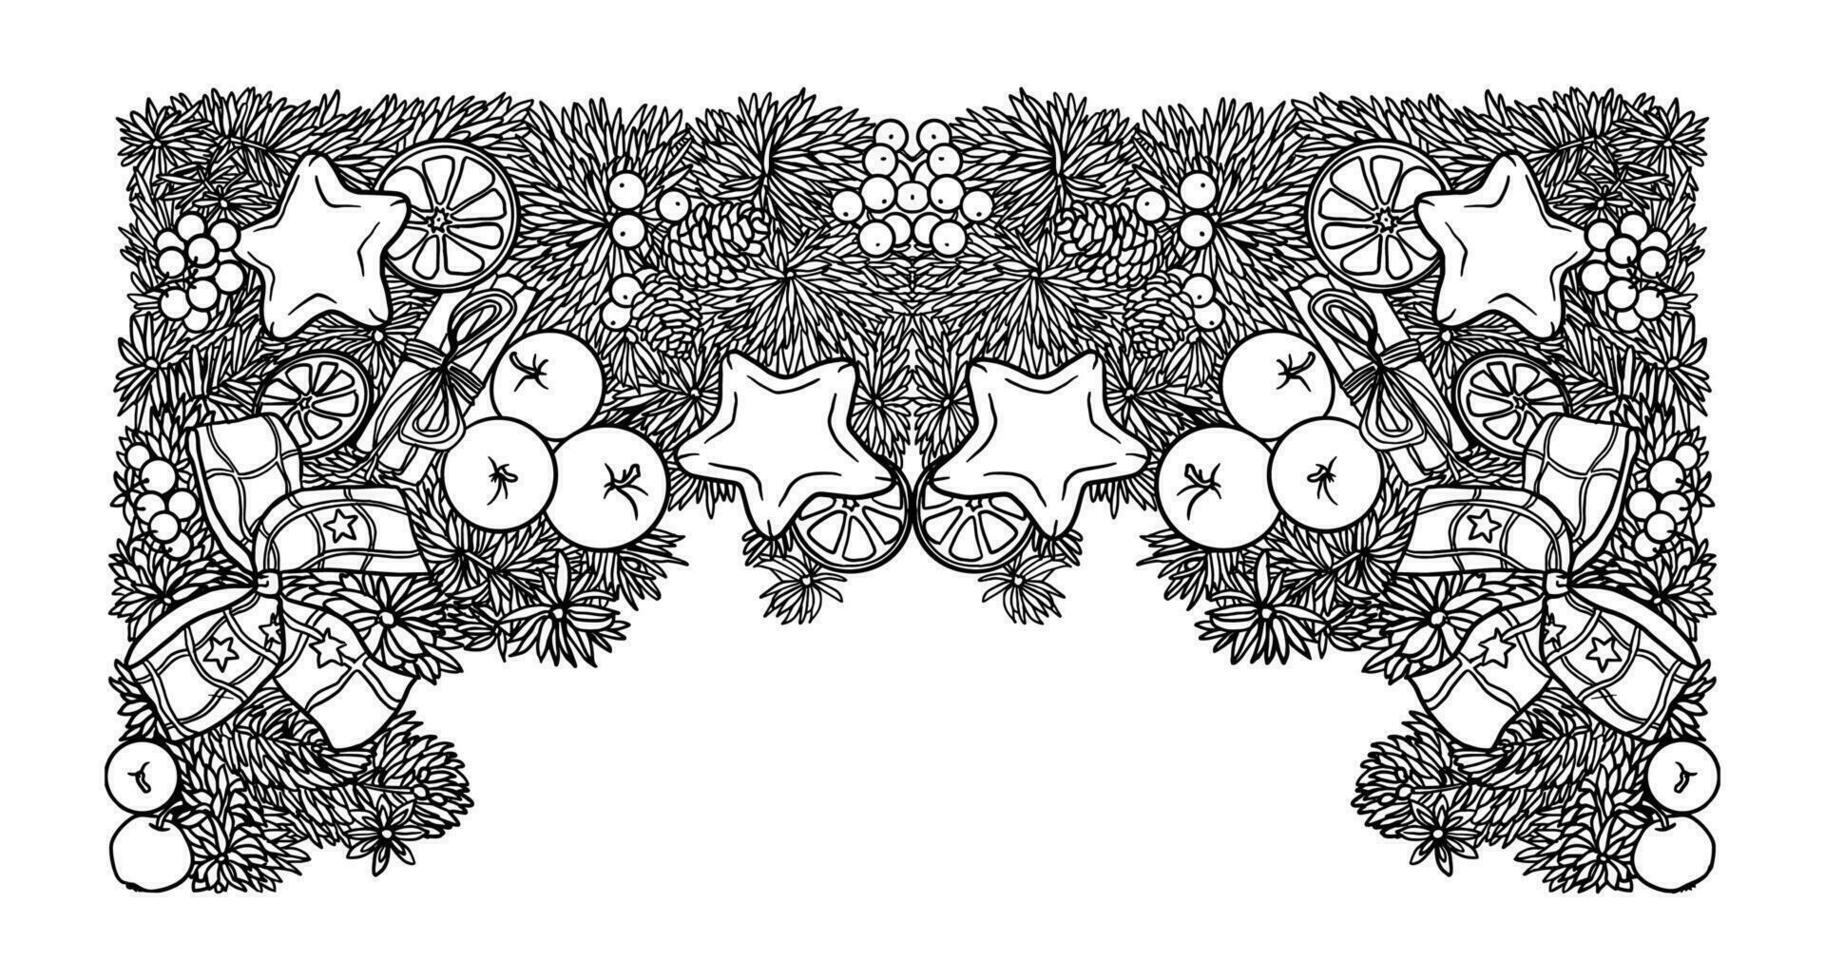 New Year border, ornament, New Year decorations, spruce branches decorated with Christmas toys, black and white drawing, highly detailed line artwork, line illustration, symmetrical illustration, vector